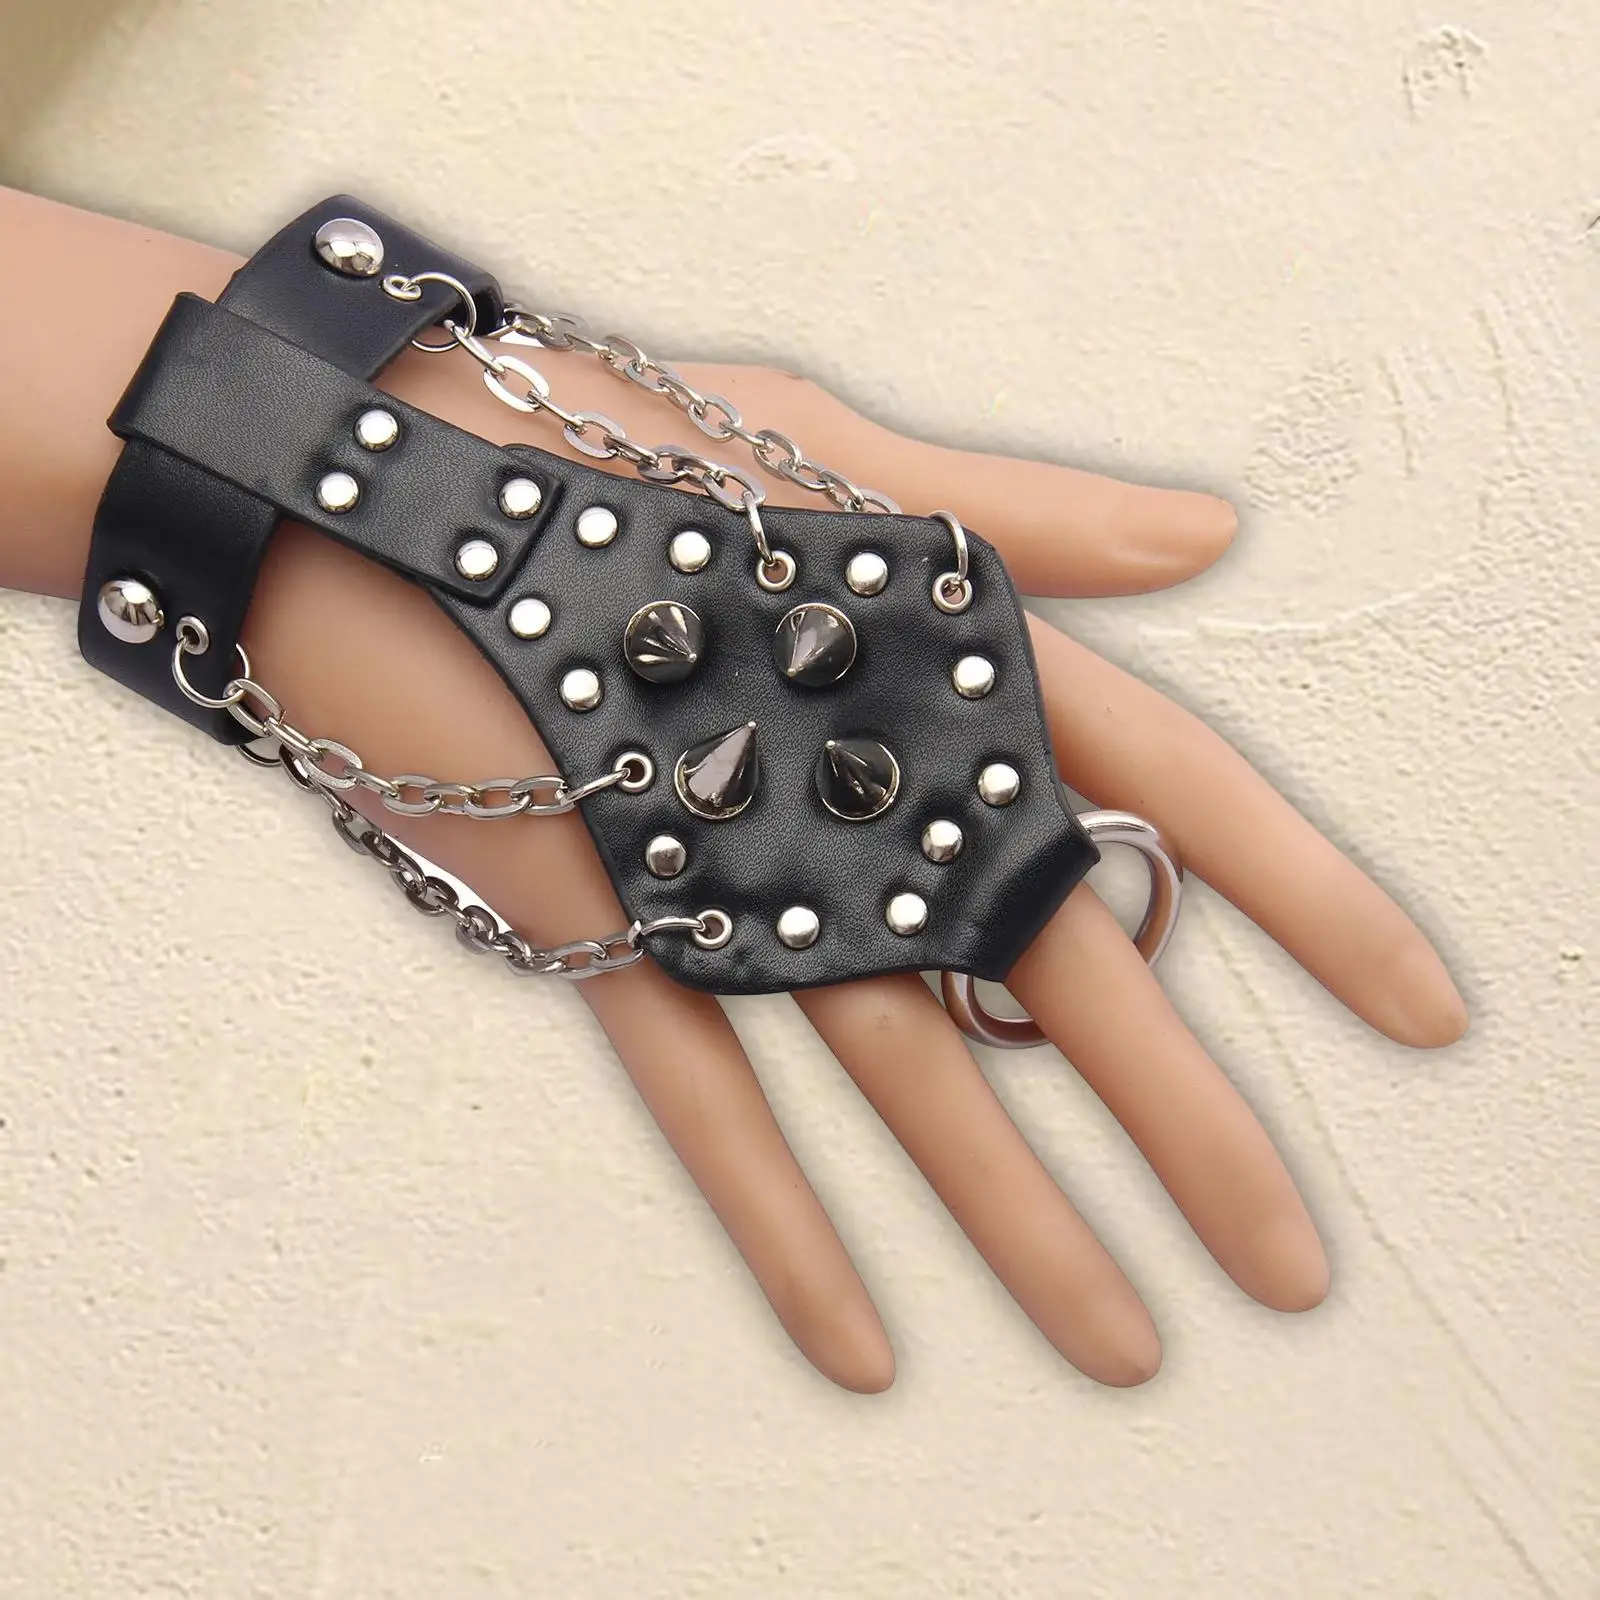 Gothic Gloves Costume Accessories Bracelets Bangle Adjustable Gloves Punk Stud Gloves for Birthday Party Photo Props Decoration